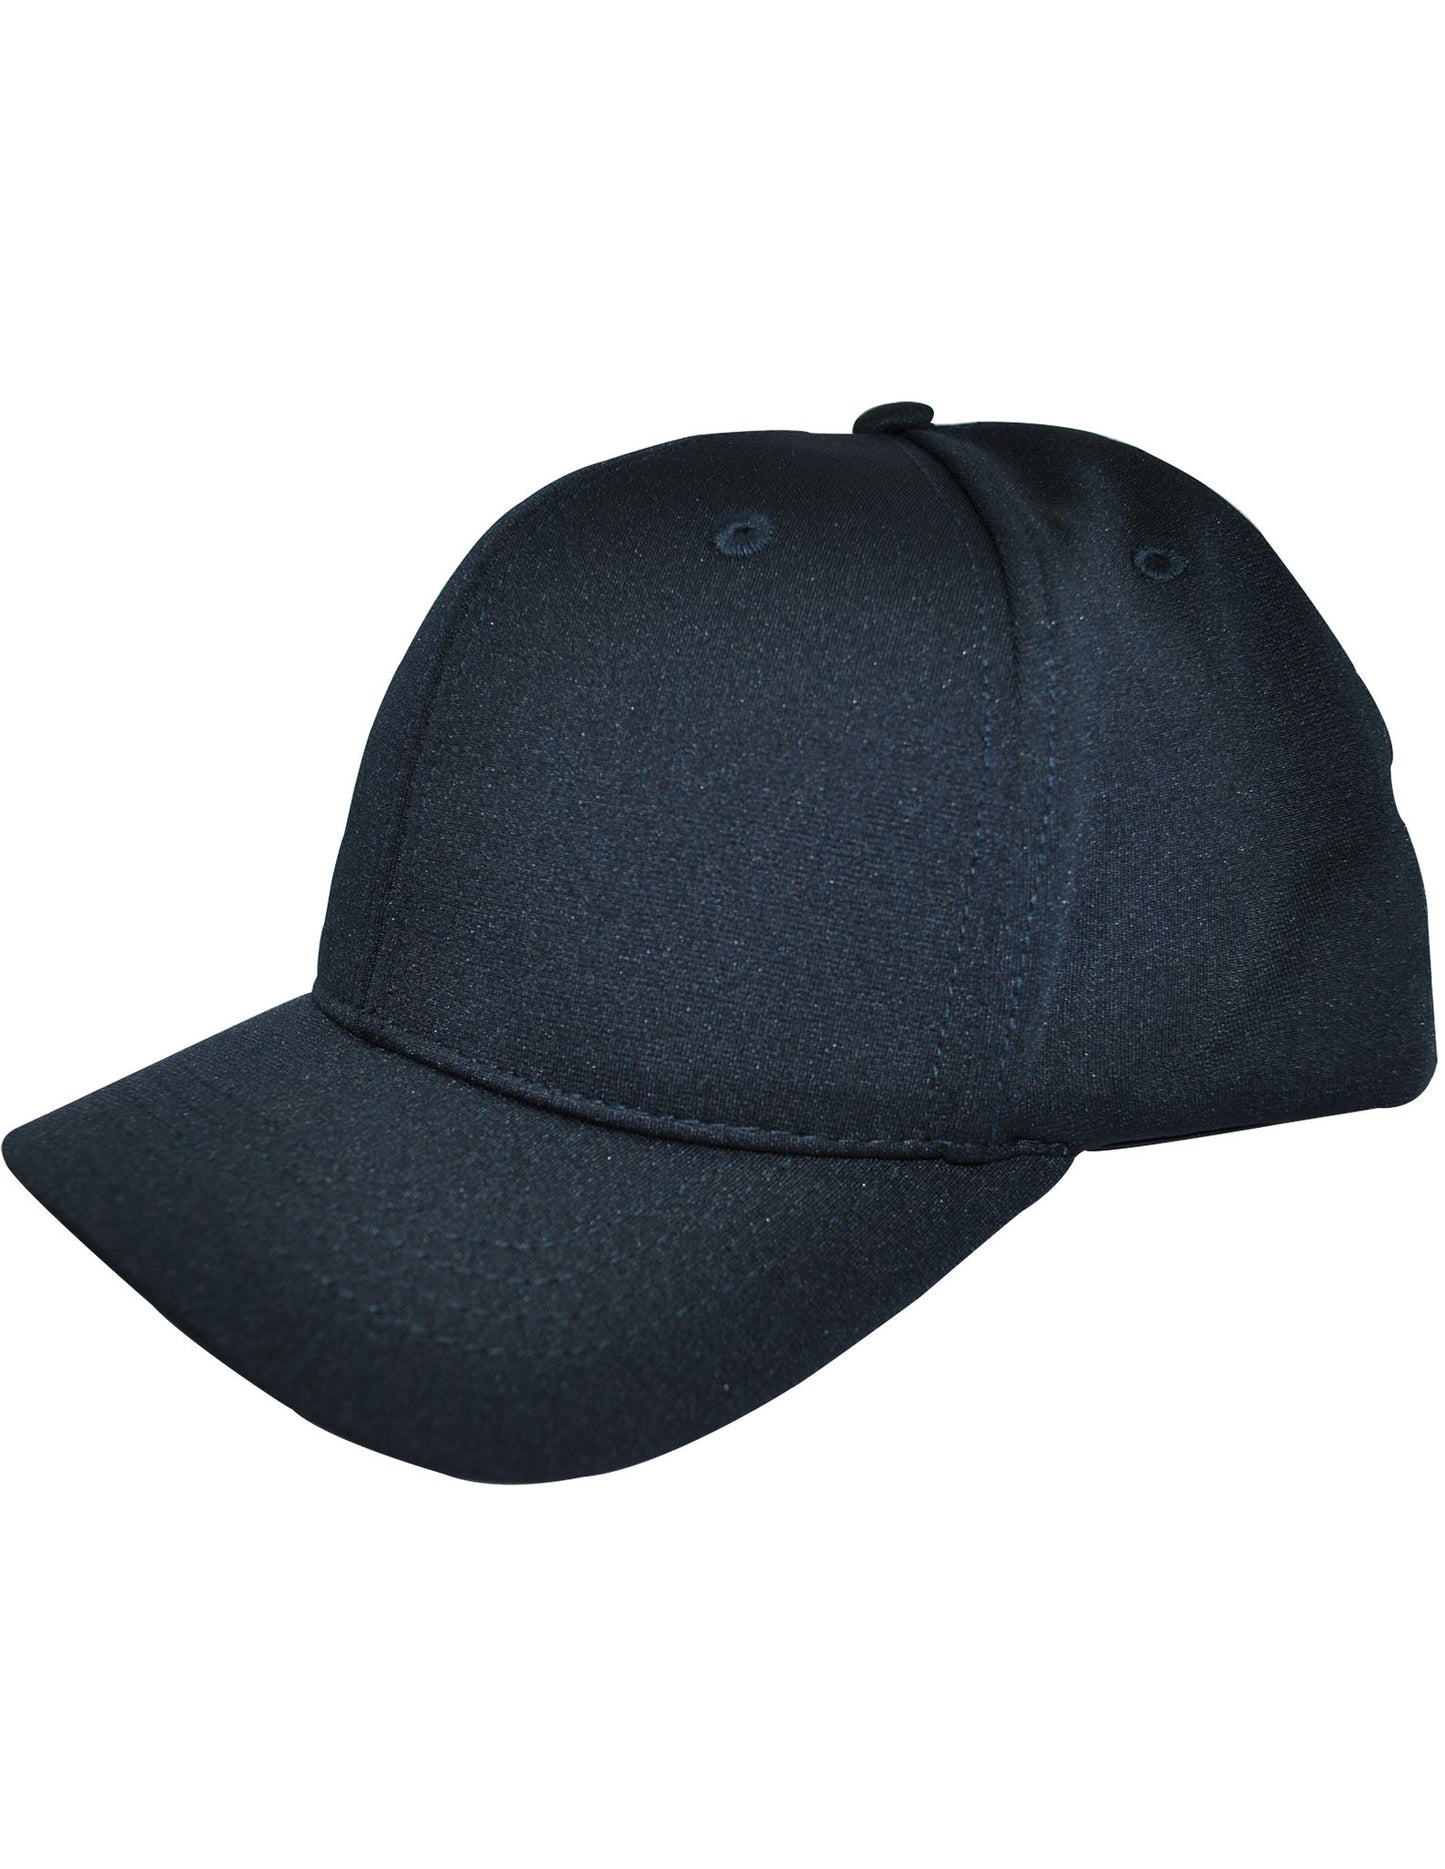 HT304 - Smitty - 4 Stitch Flex Fit Umpire (PLATE) Hat - Available in Black and Navy